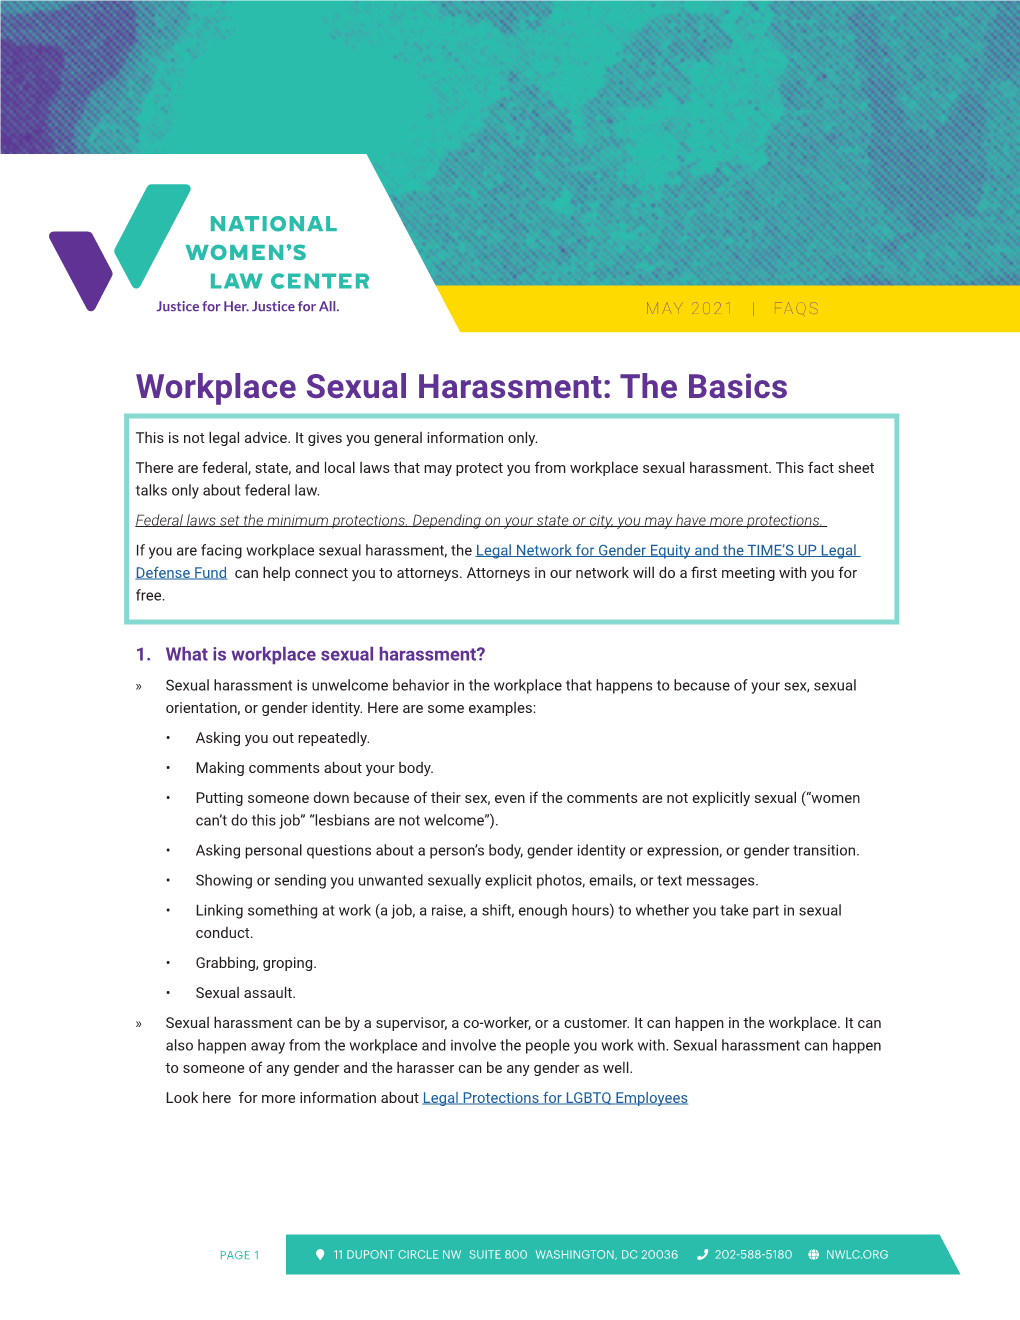 Workplace Sexual Harassment: the Basics